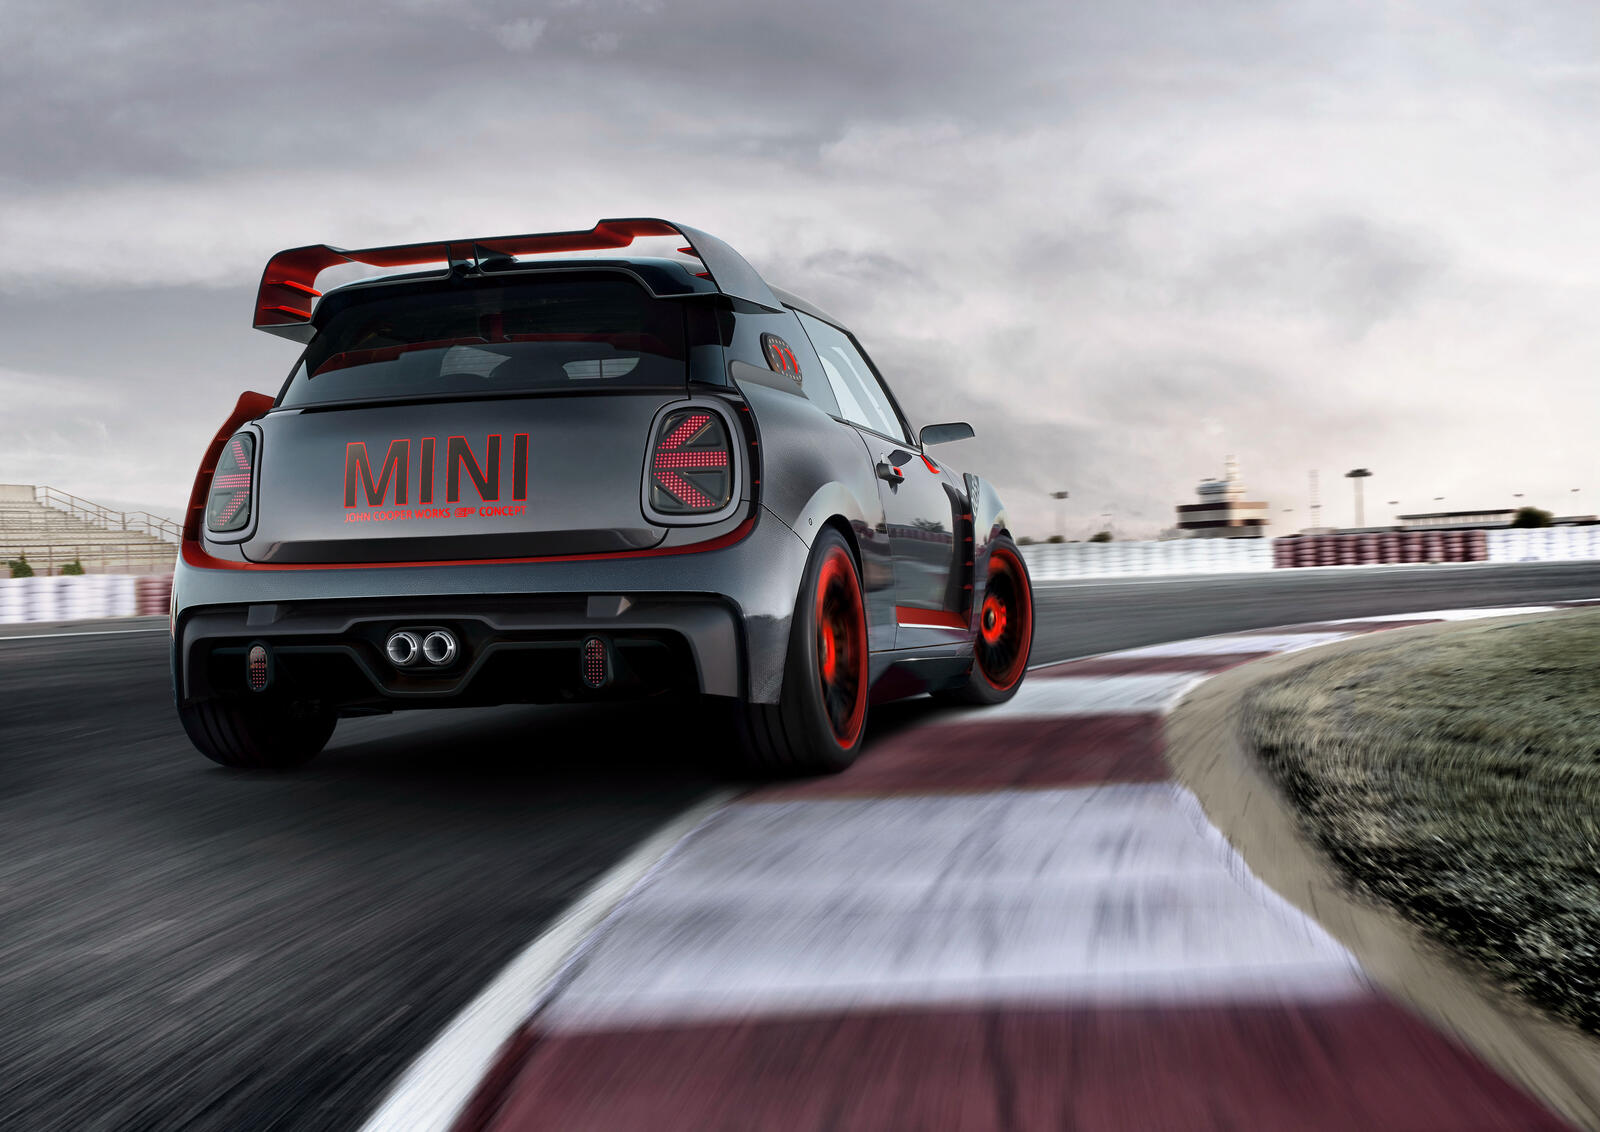 Wallpapers Mini Cooper cars modified on the desktop